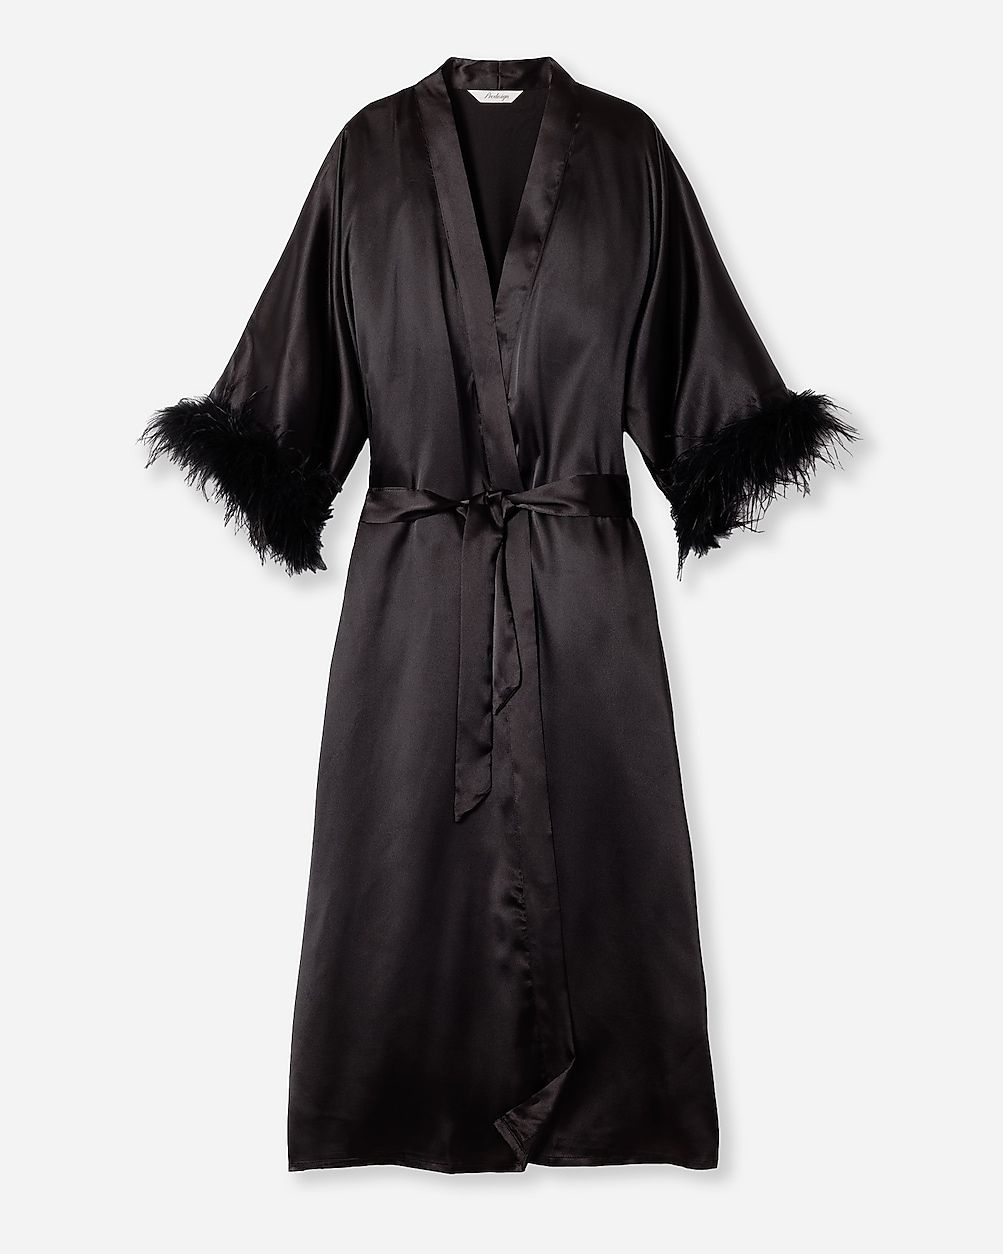 Petite Plume™ women's silk robe with feathers | J.Crew US